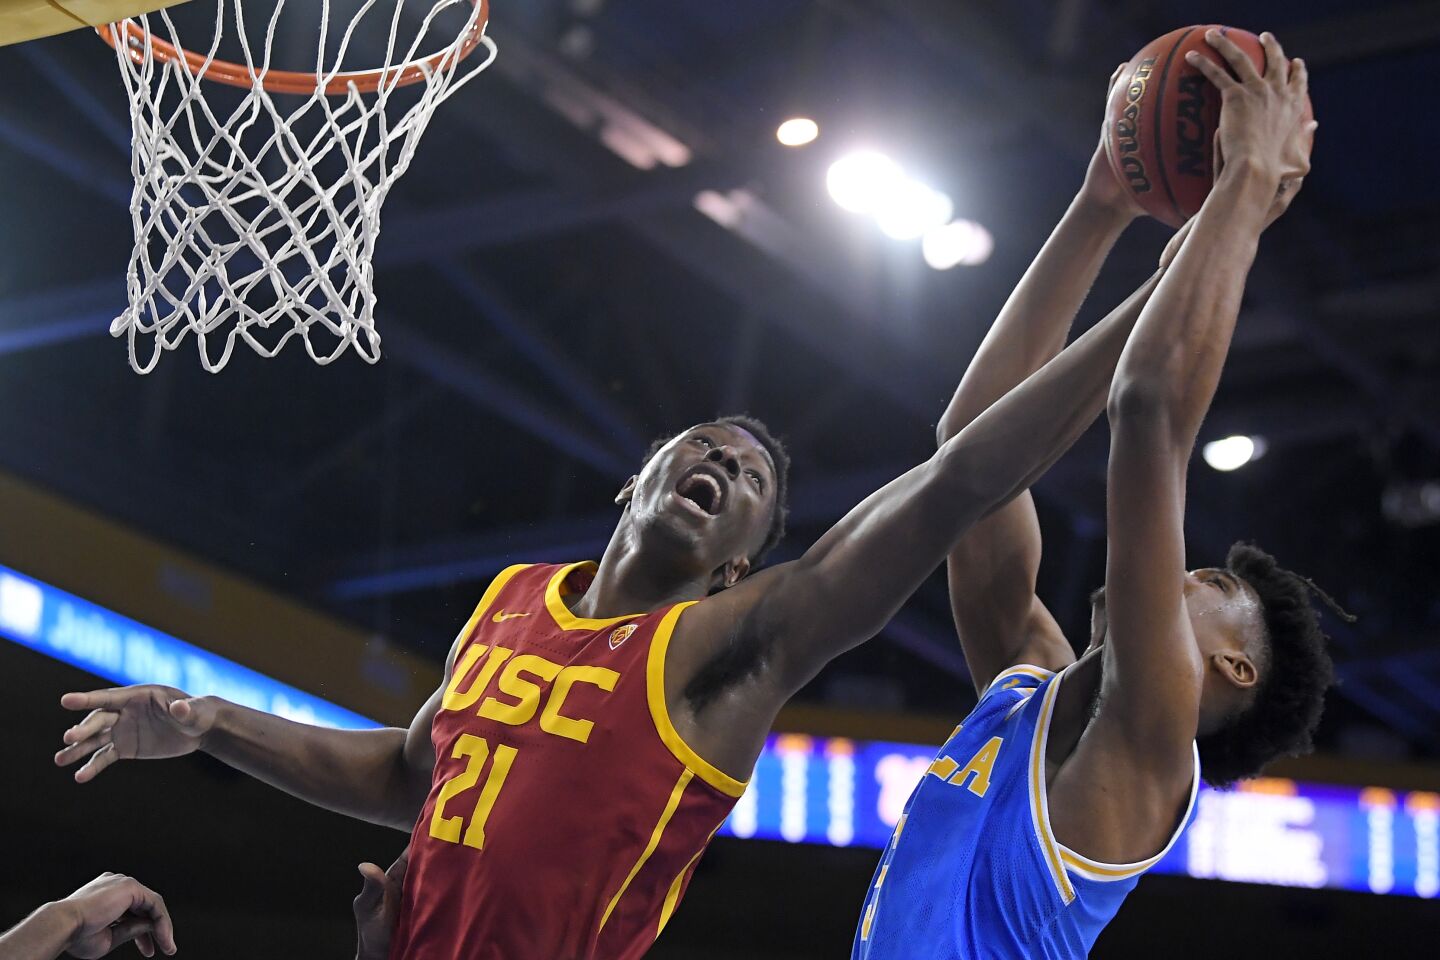 USC forward Onyeka Okongwu and UCLA guard Chris Smith battle for a rebound during the first half of a game Jan. 11 at Pauley Pavilion.